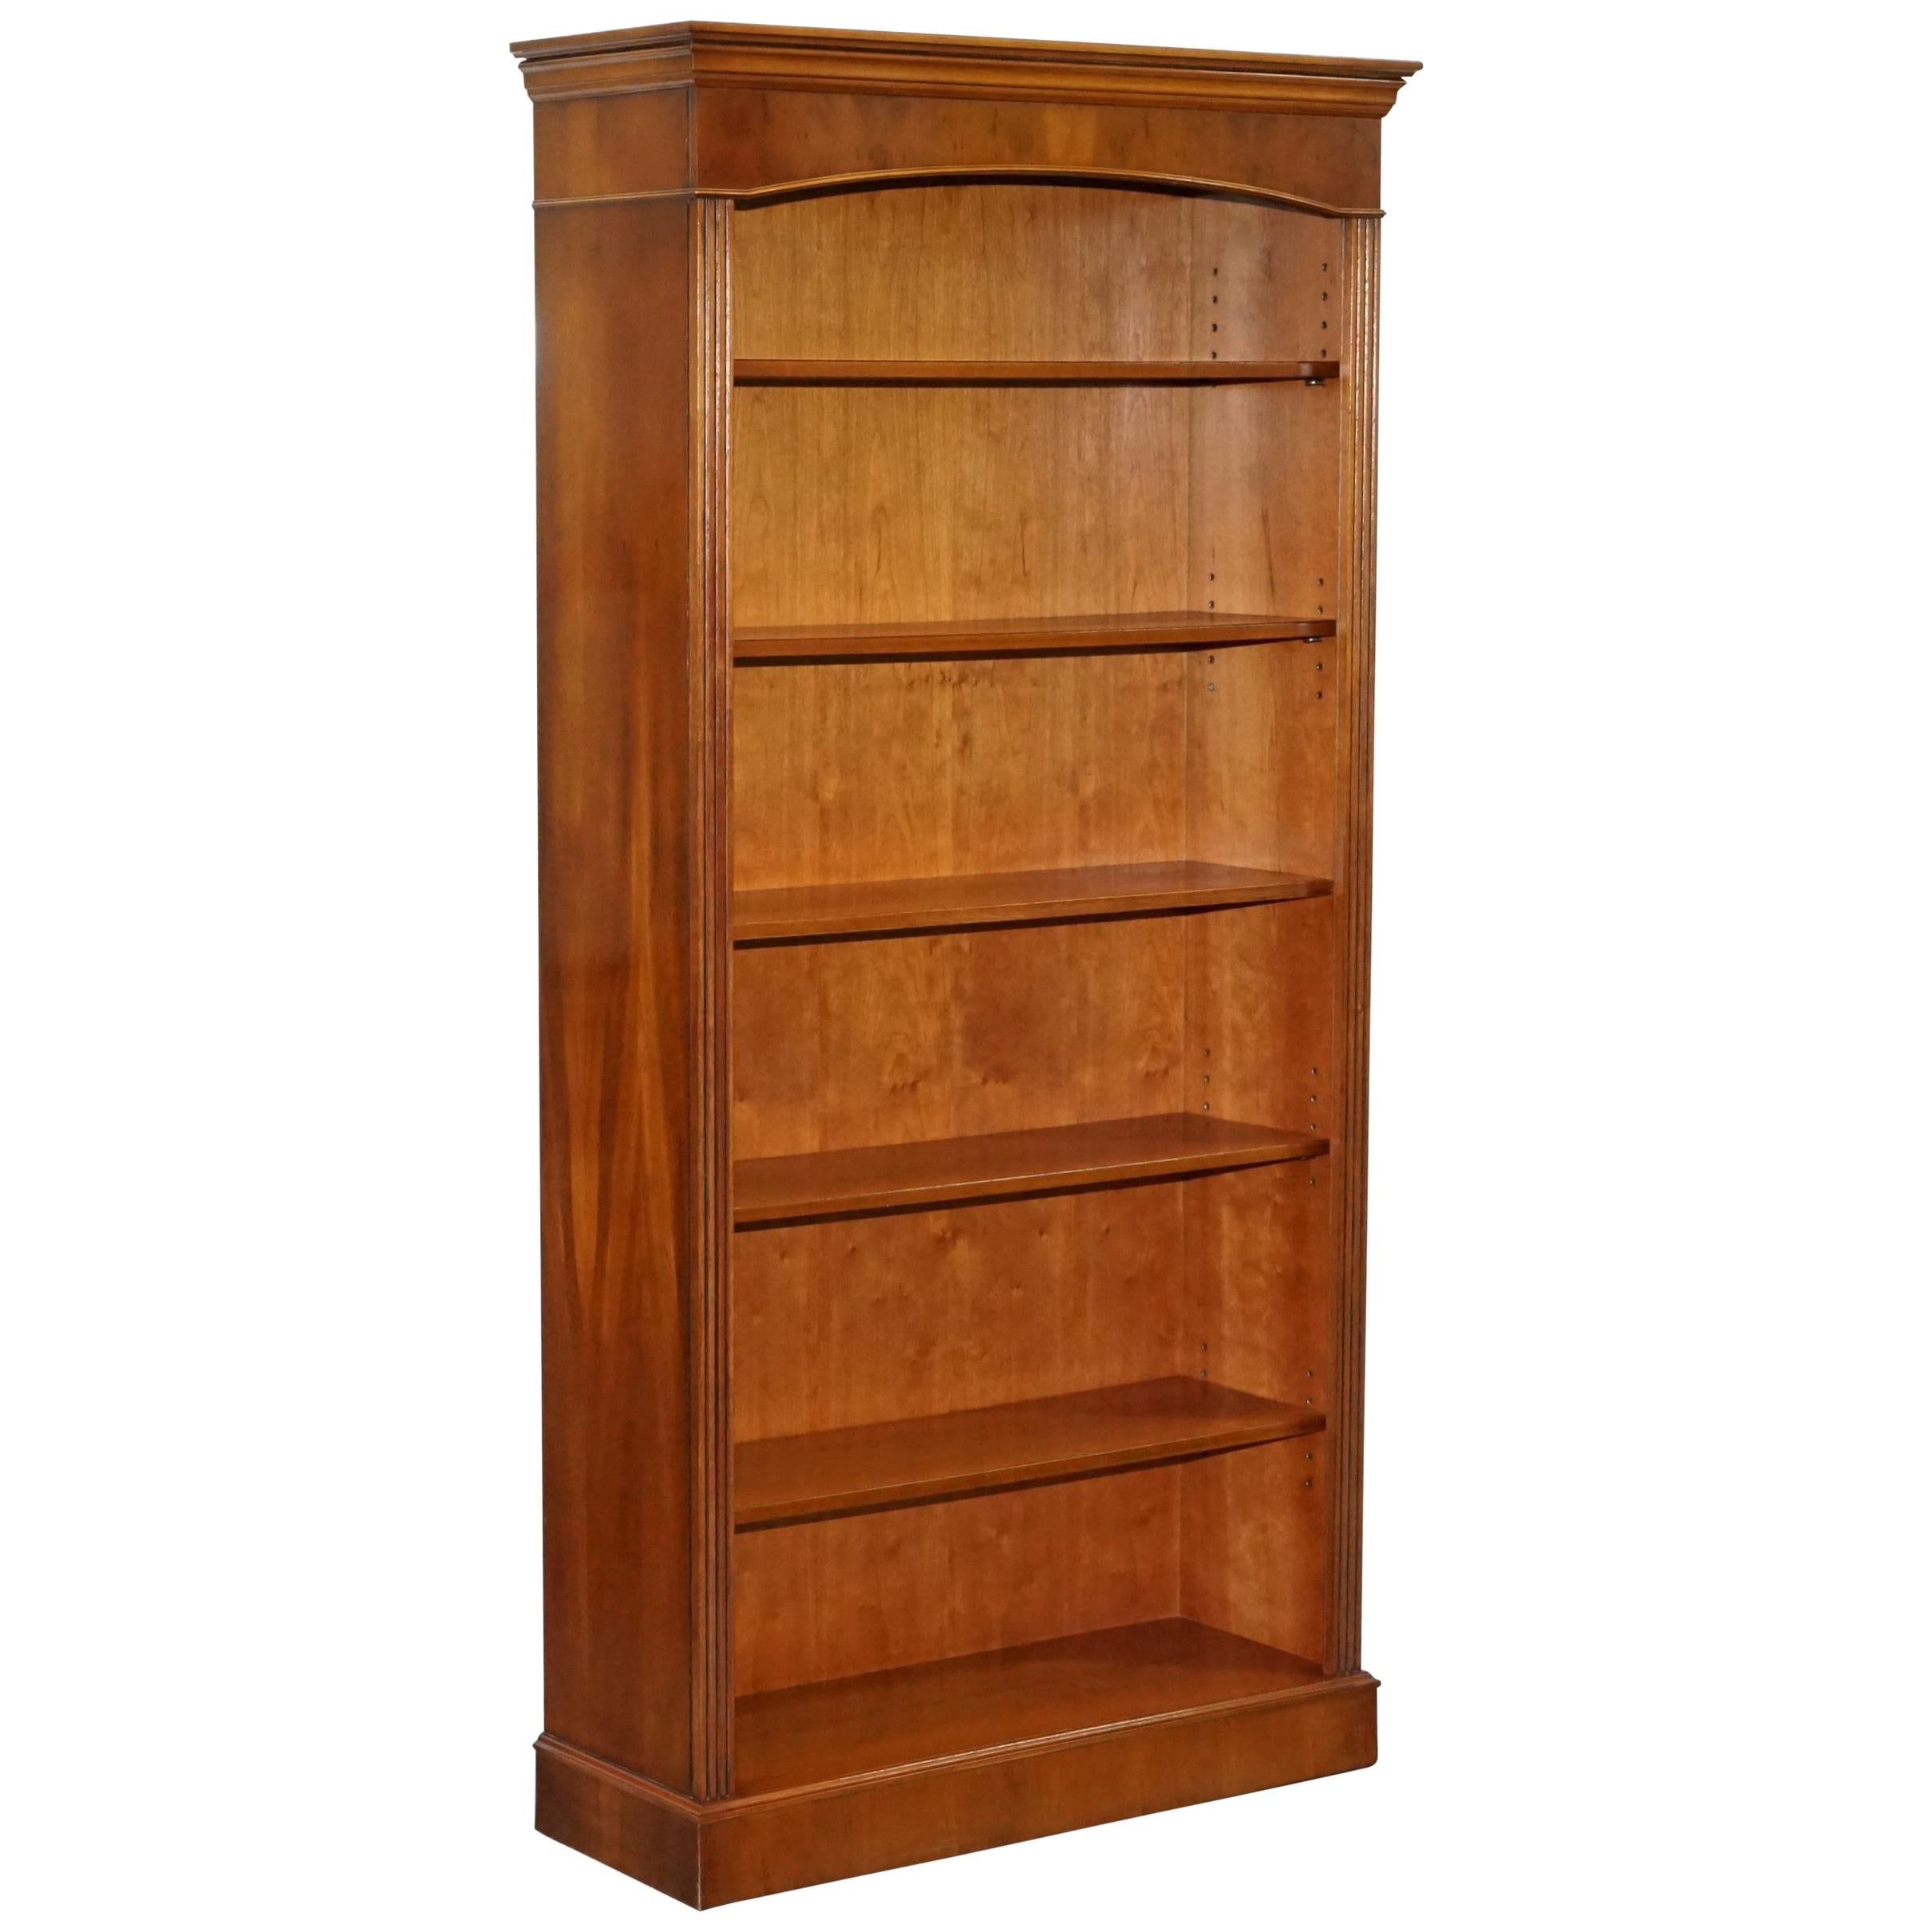 Lovely Burr Yew Wood Library Legal Bookcase with Height Adjustable Shelves